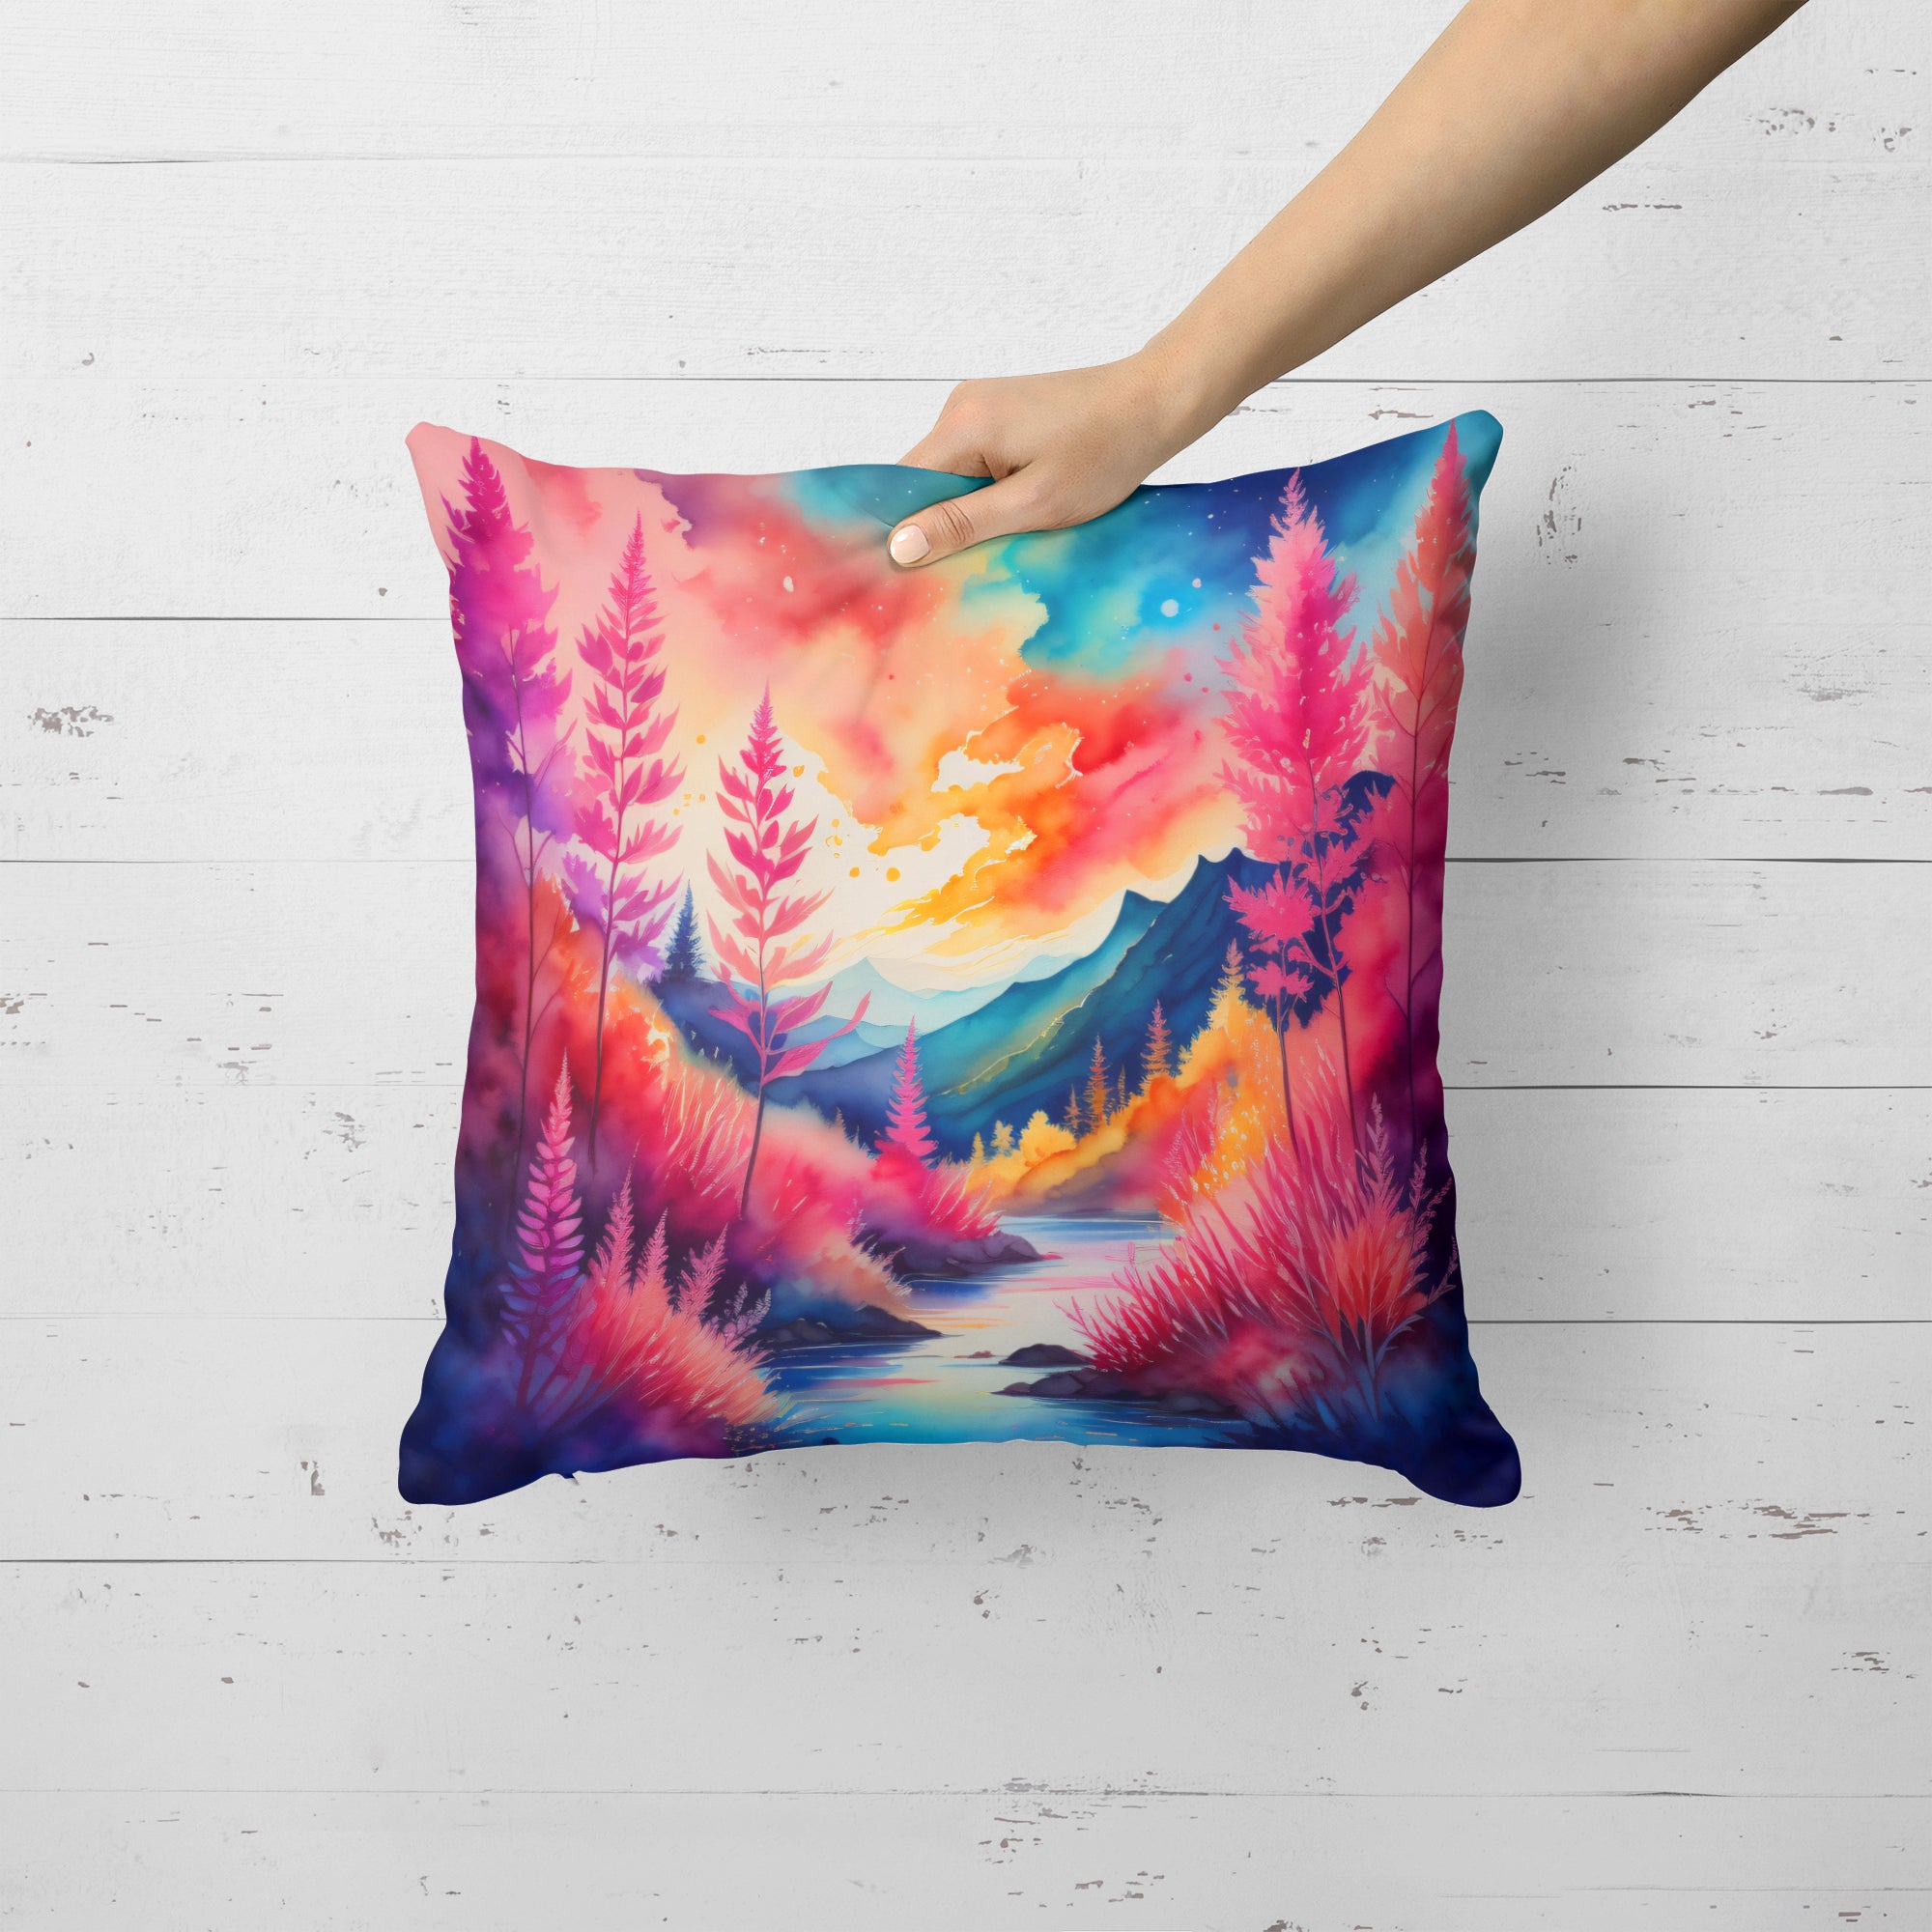 Buy this Colorful Astilbe Fabric Decorative Pillow